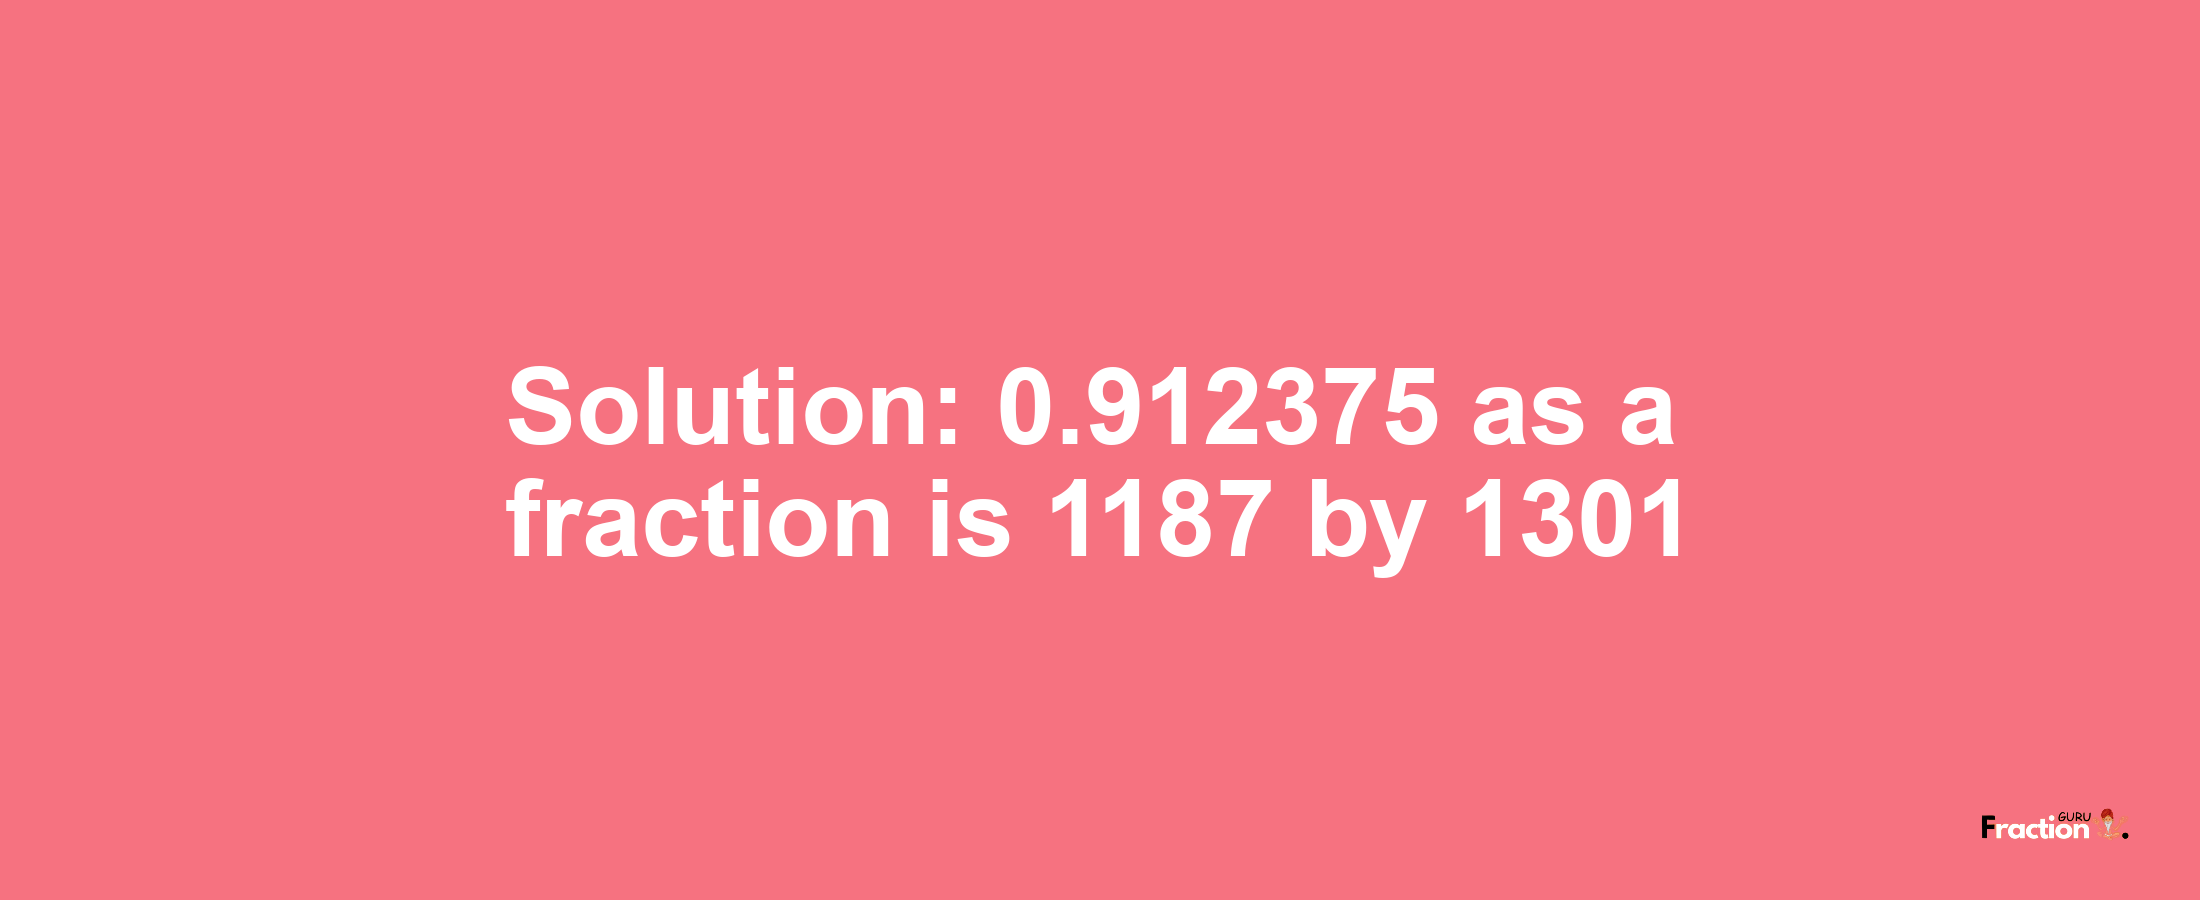 Solution:0.912375 as a fraction is 1187/1301